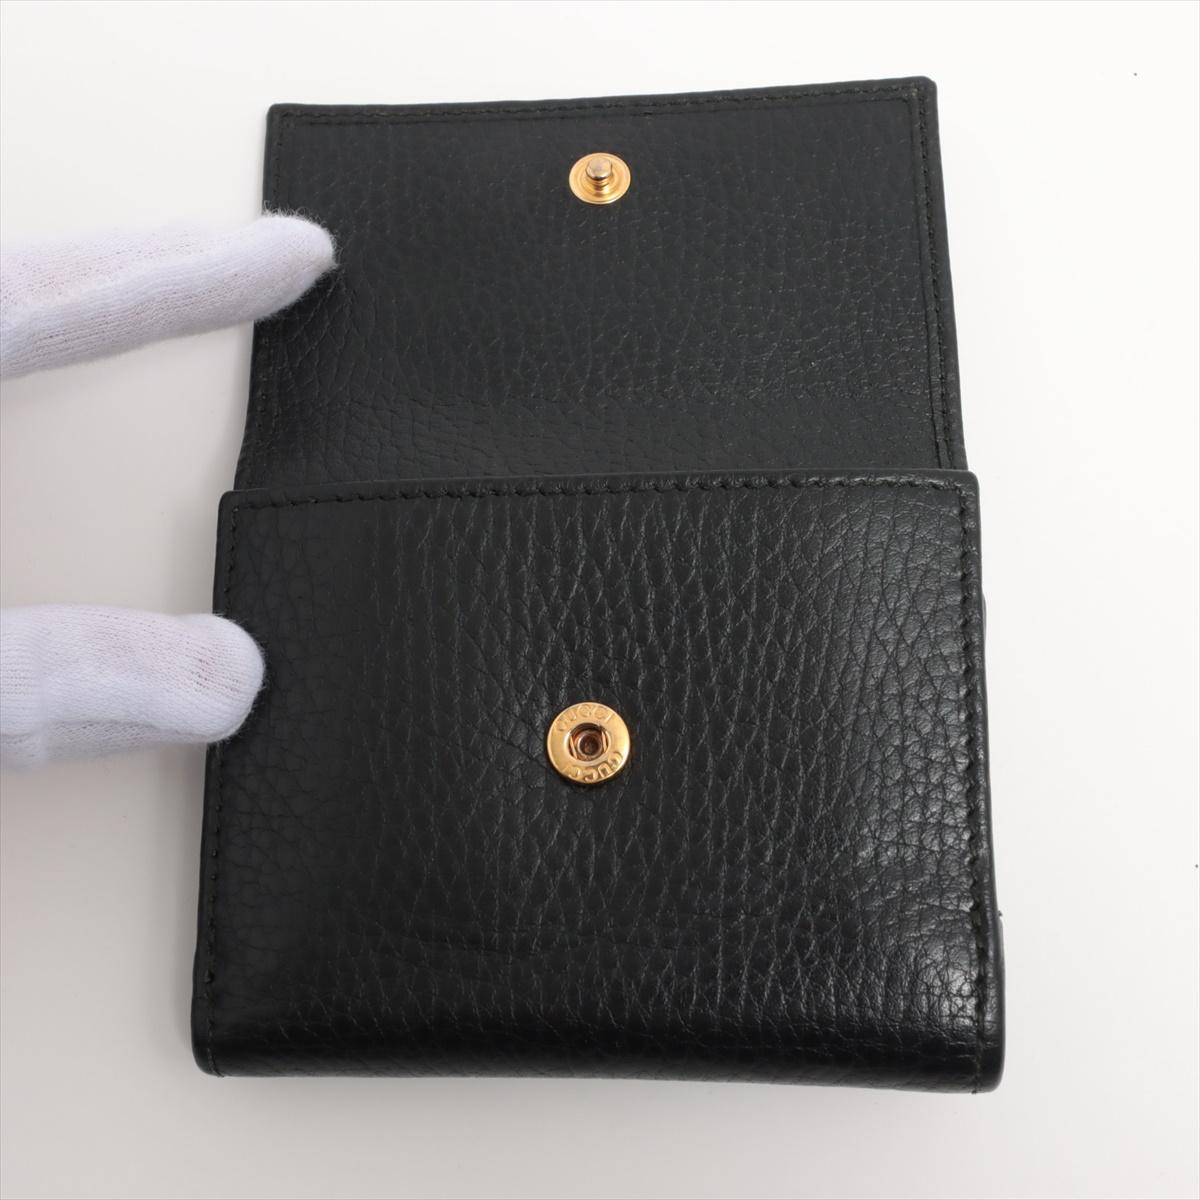 Gucci GG Marmont Leather Compact Wallet Black 2